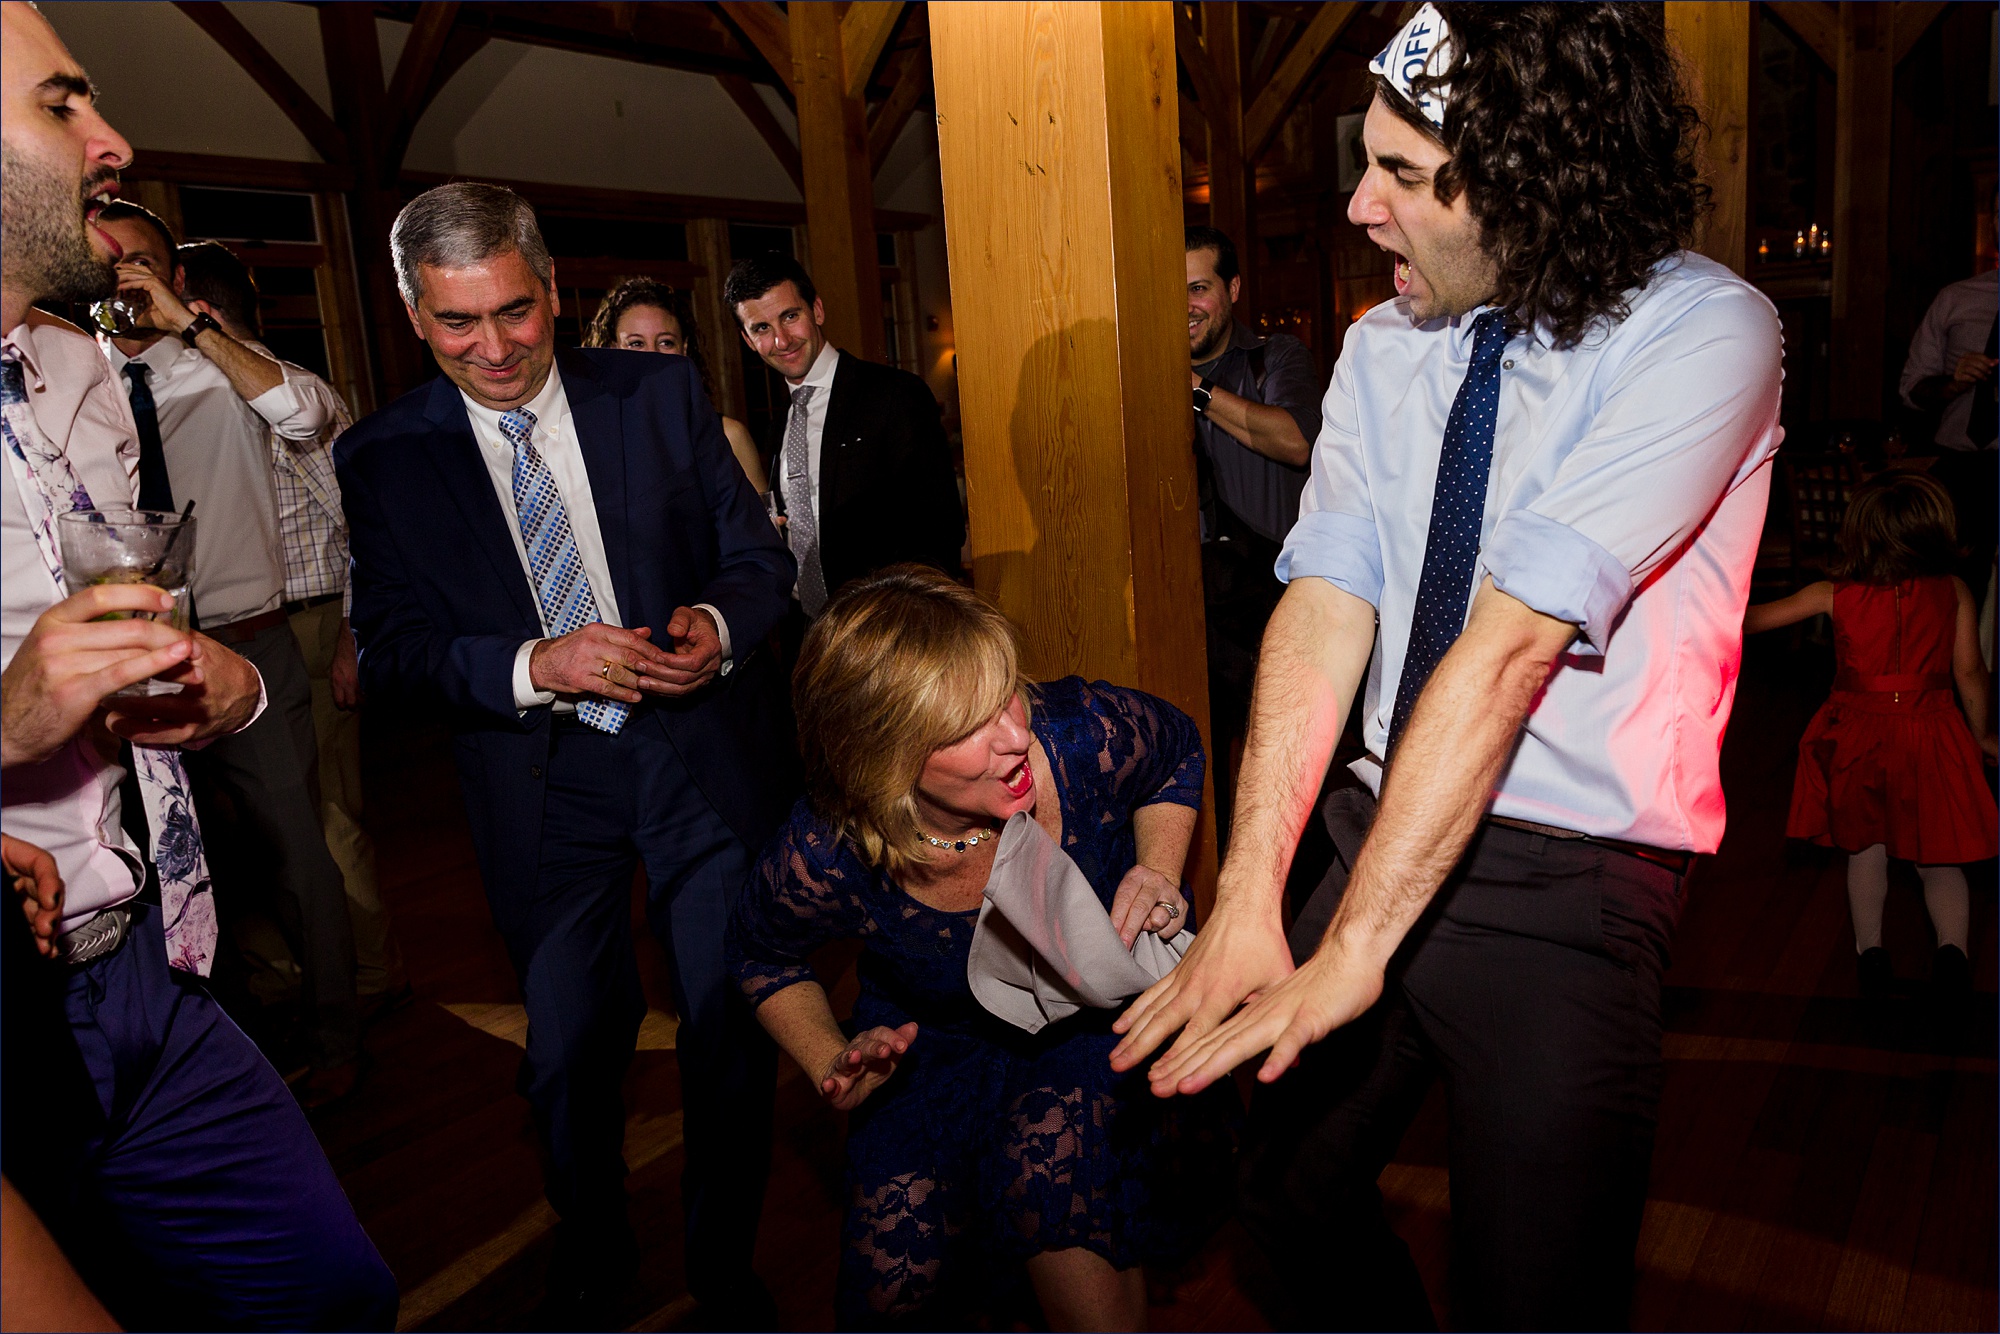 Guests get rowdy on the dance floor to some nasty songs at the southern Maine wedding day celebration